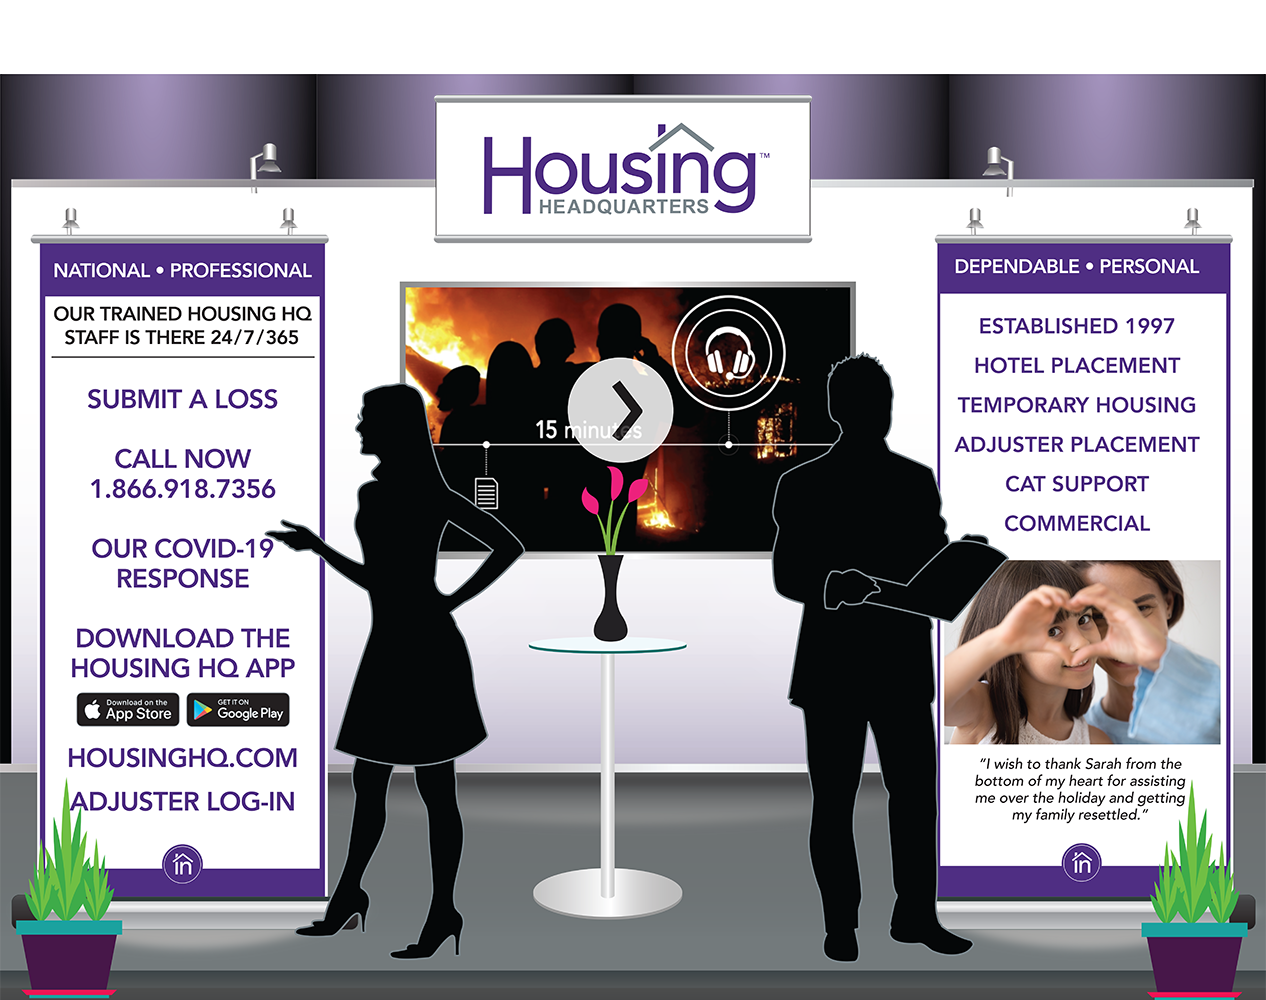 Housing Headquarters Information Booth